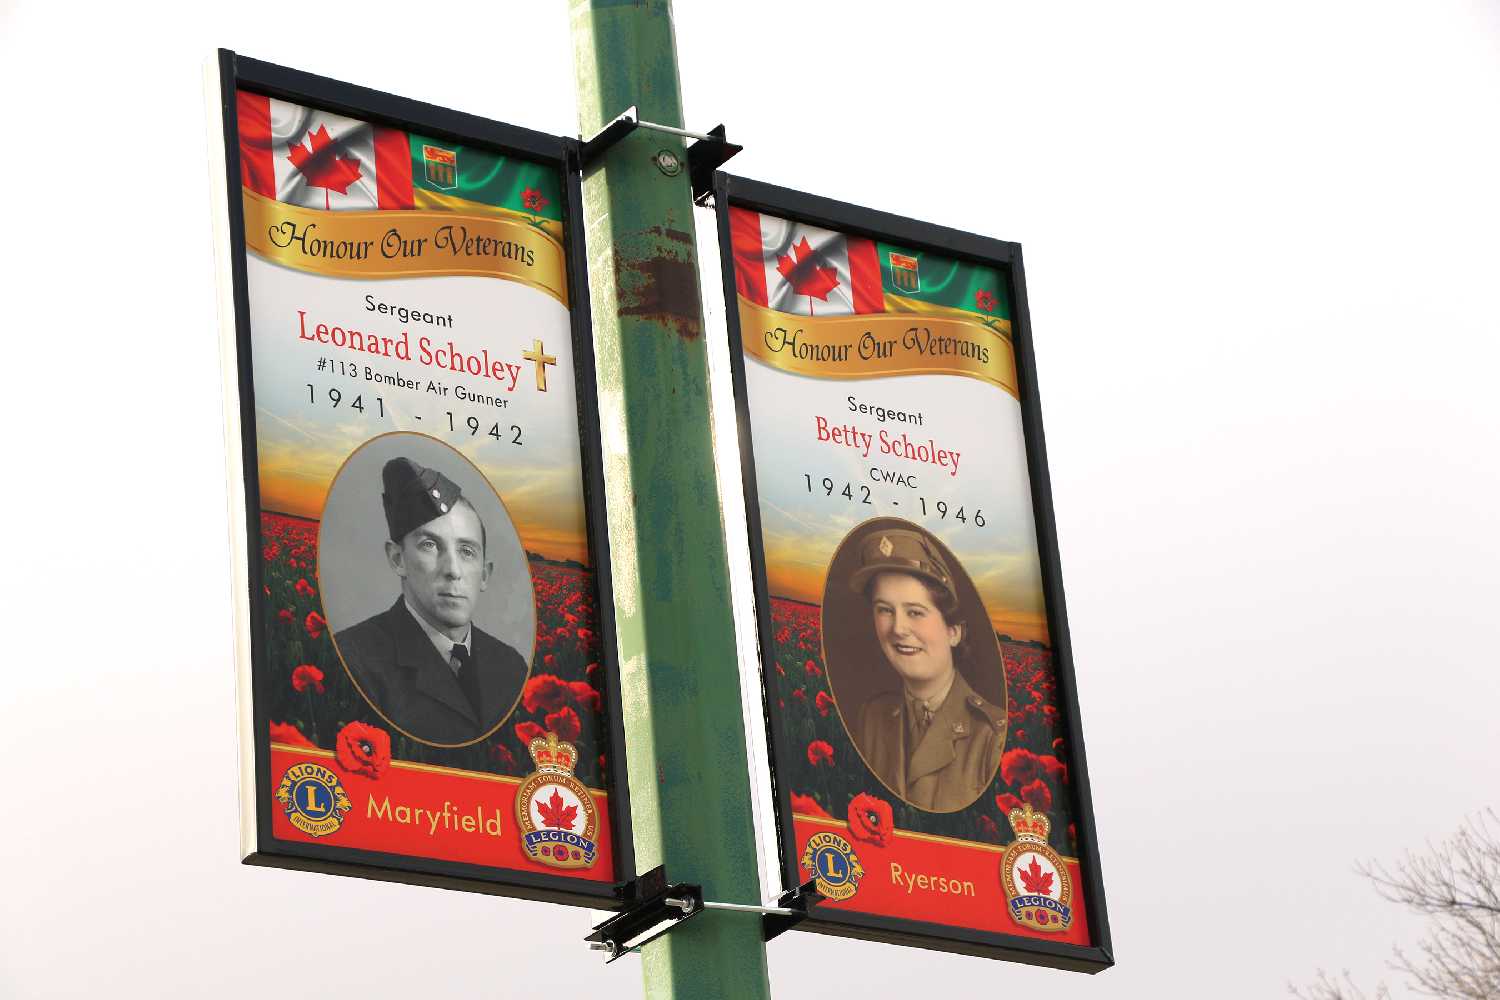 One of the various veteran signs displayed, in honor of two veterans from the Second World War - Leonard Scholey and Betty Scholey.